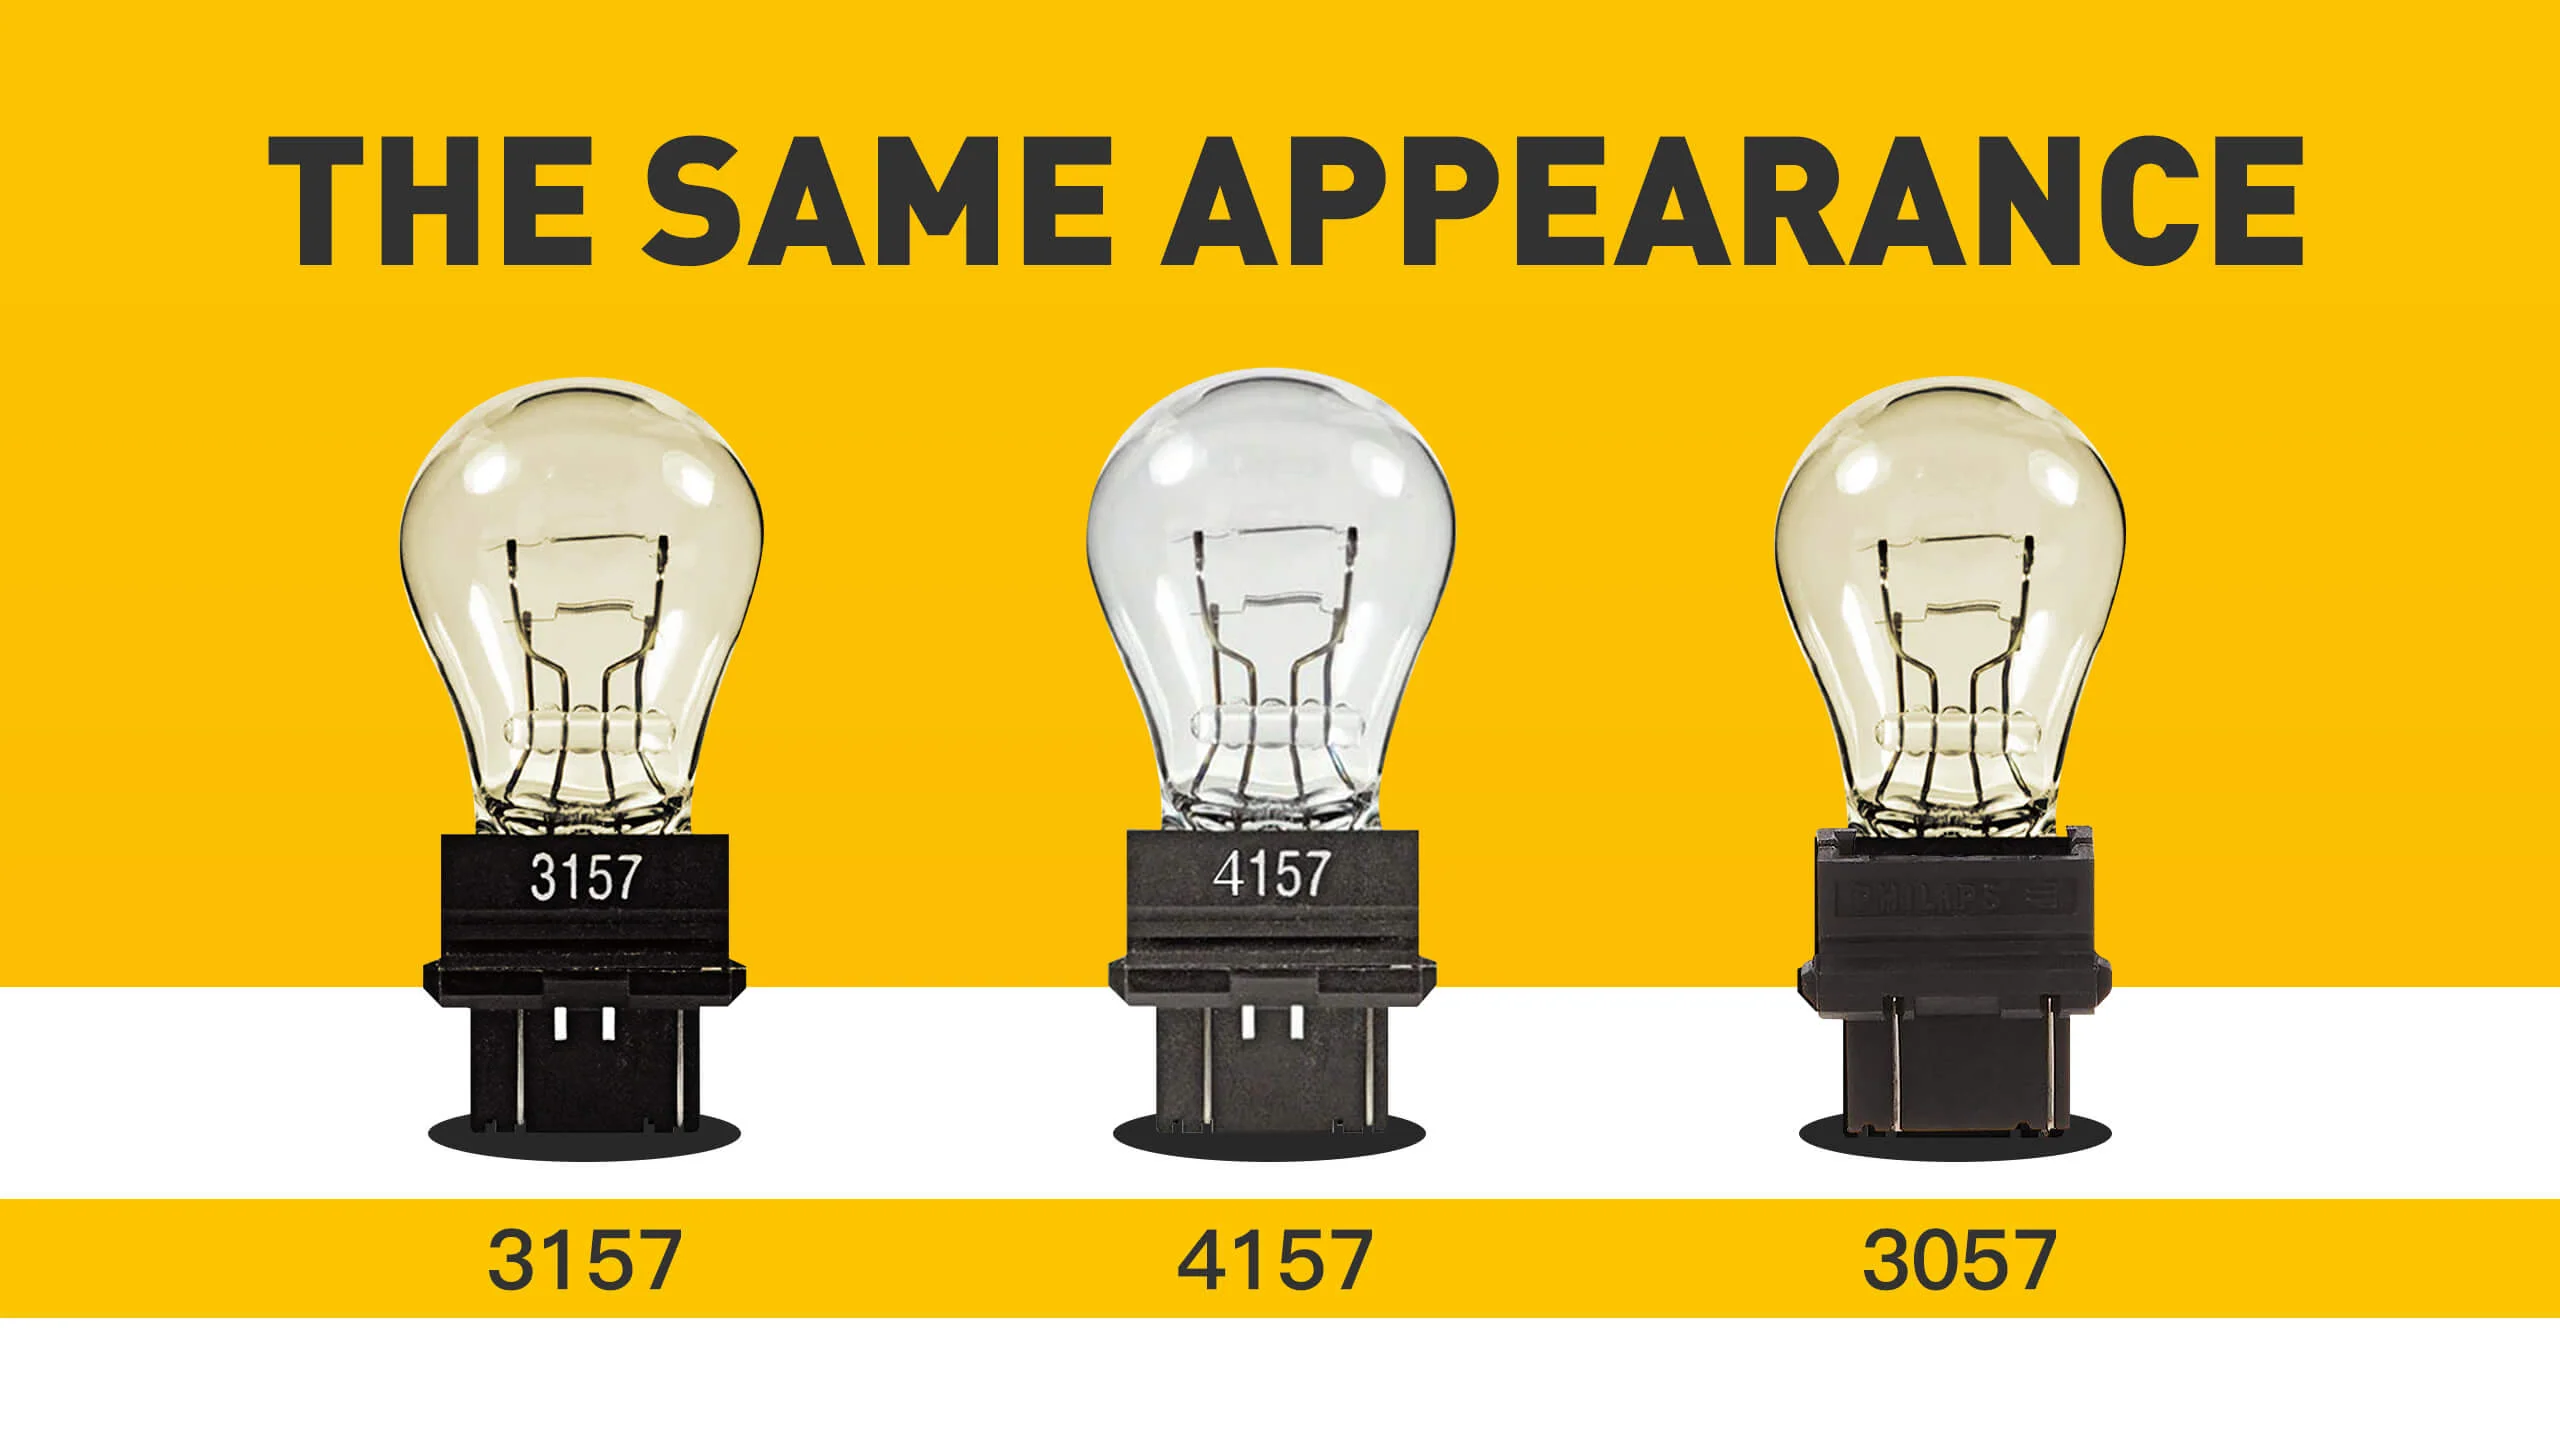 3157 VS 4157 Bulbs | What’s The Difference?